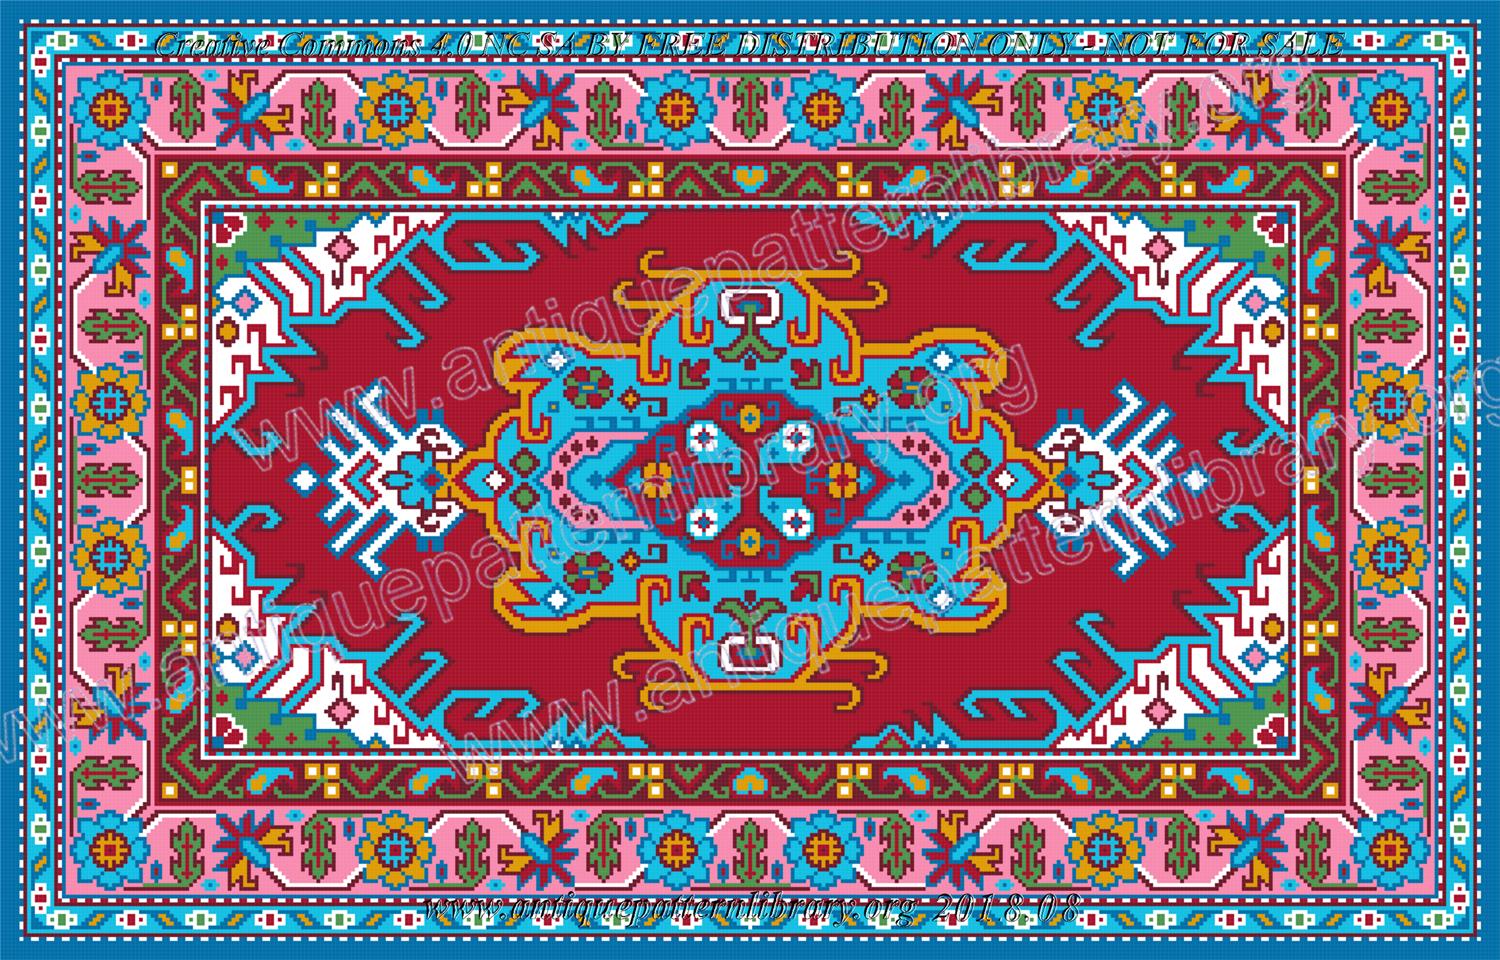 A-MH005 Tapestry design in red, turquoise, pink.